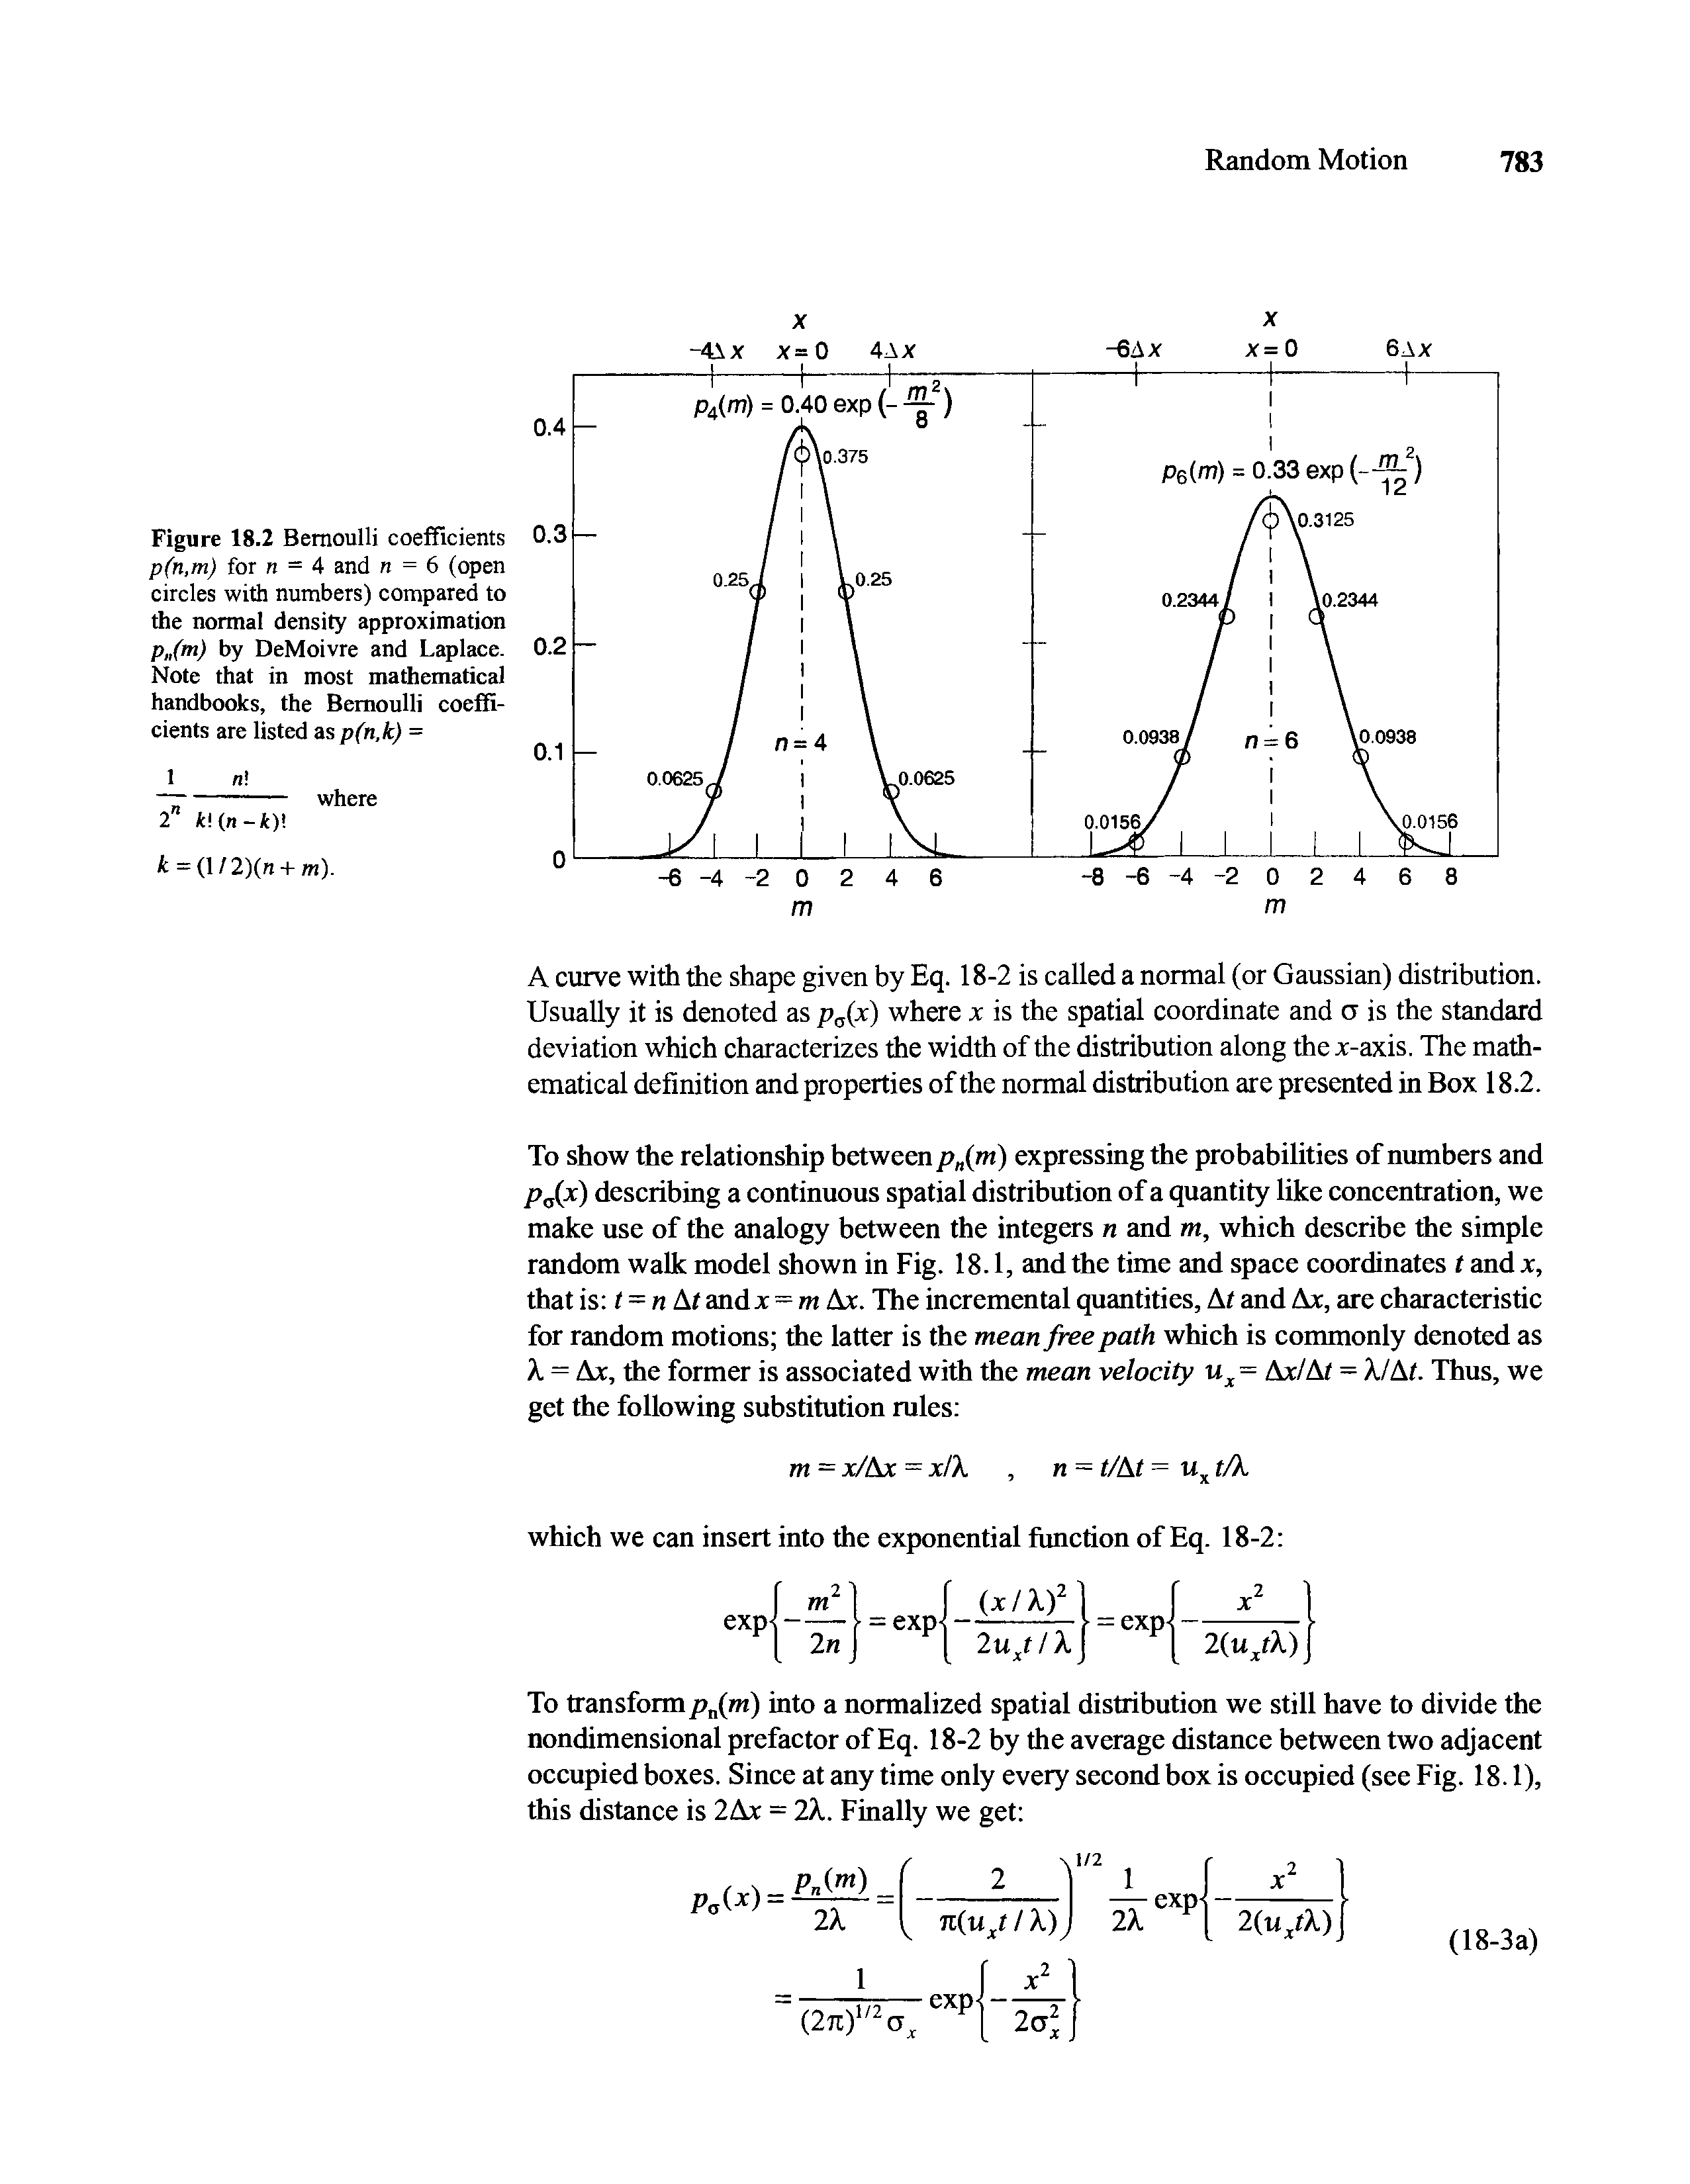 Figure 18.2 Bernoulli coefficients p(n,m) for n - 4 and n = 6 (open circles with numbers) compared to the normal density approximation p (m) by DeMoivre and Laplace. Note that in most mathematical handbooks, the Bernoulli coefficients are listed as p(n,k) =...